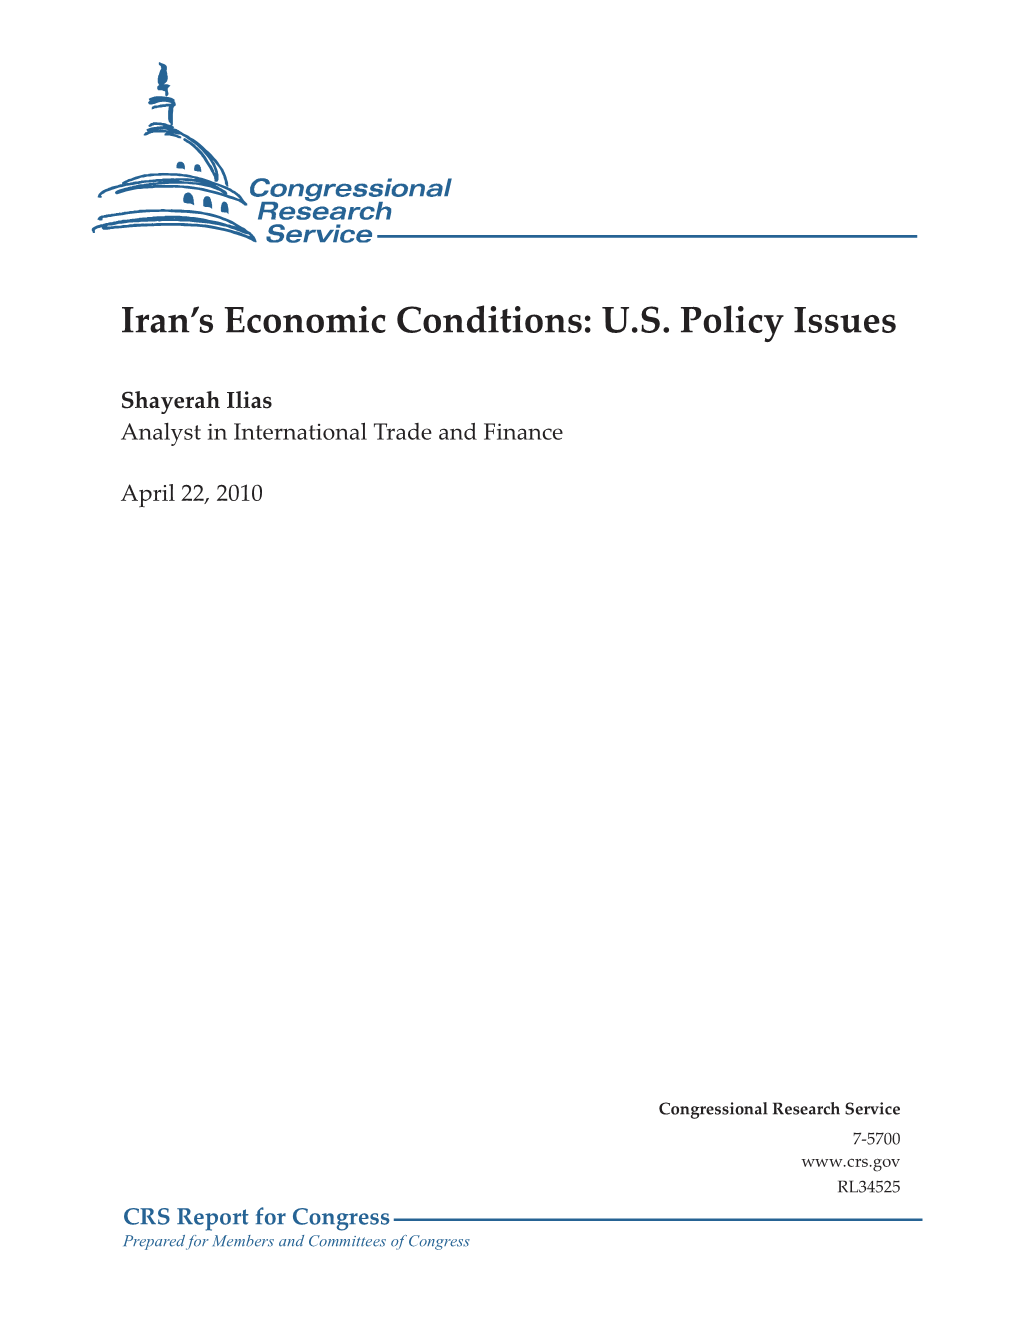 Iran's Economic Conditions: U.S. Policy Issues